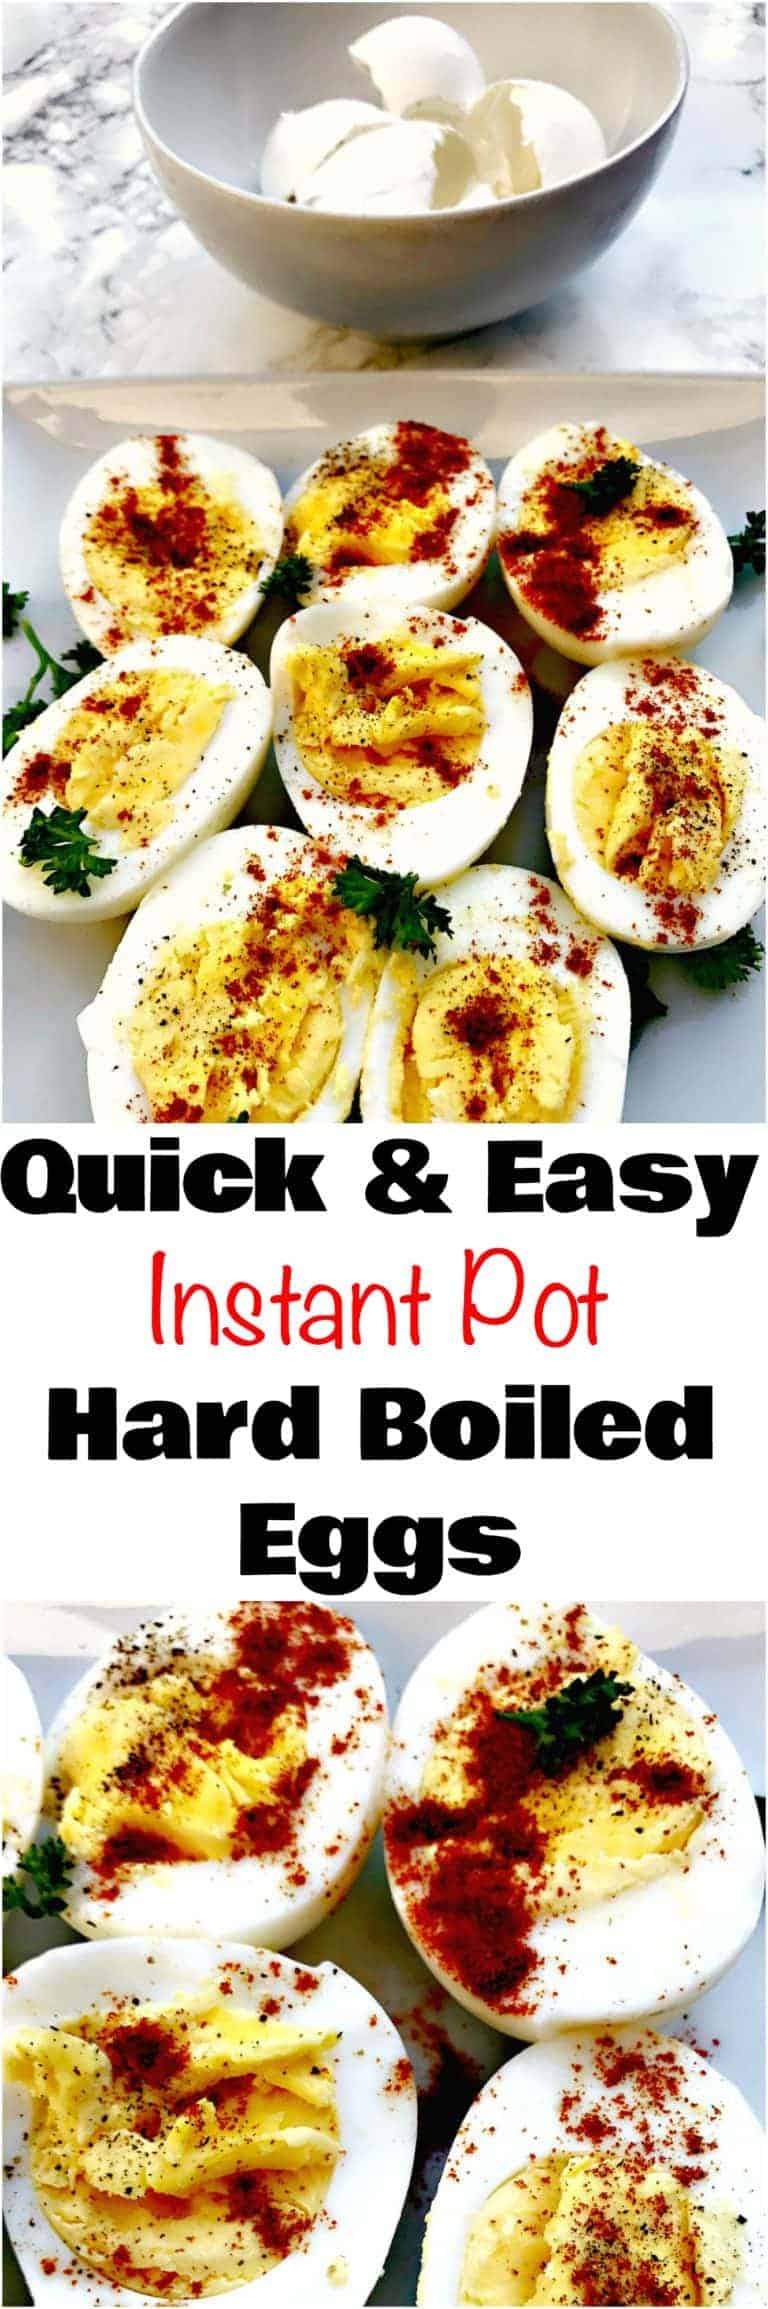 How to Make Easy Hard Boiled Eggs Using the Instant Pot